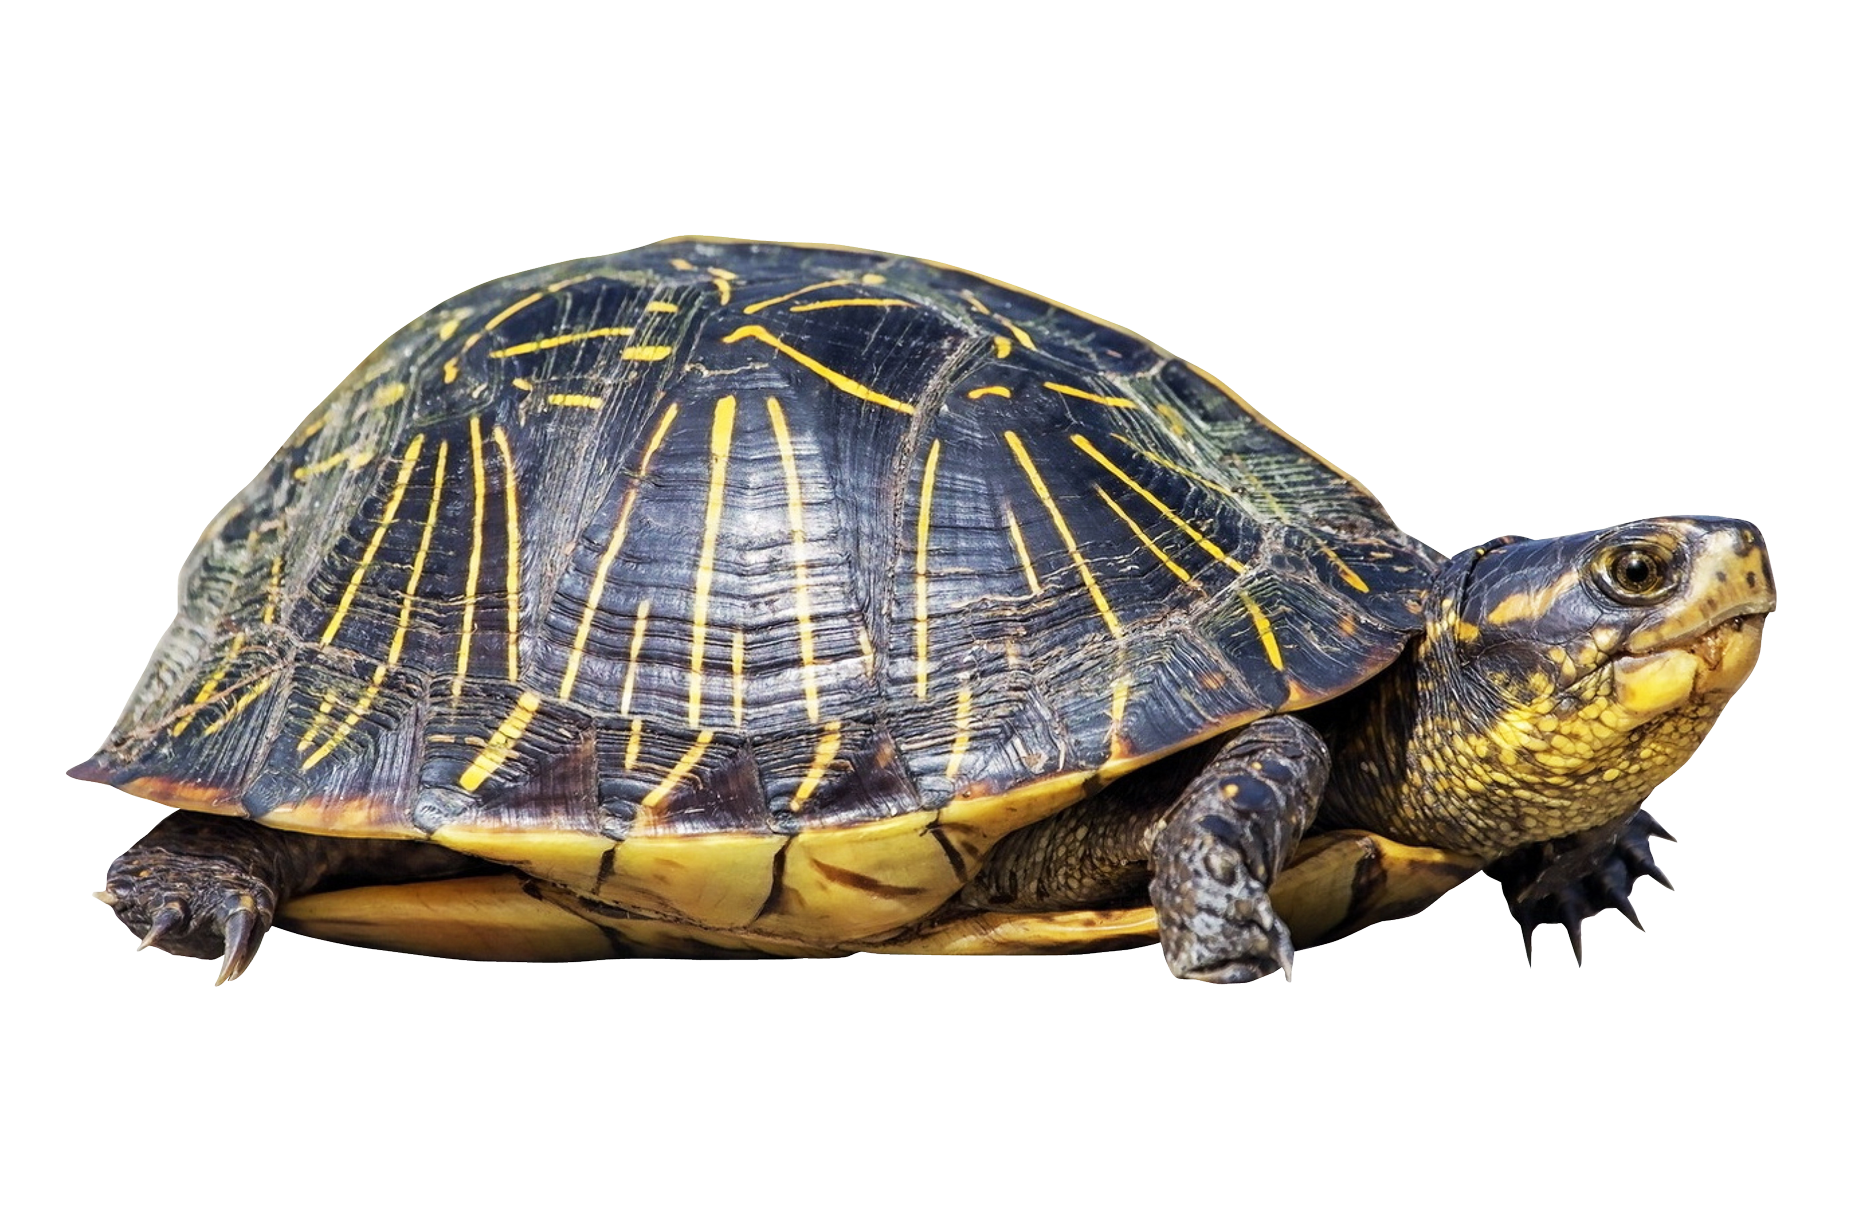 Turtle Shell Png Hd Transparent Turtle Shell Hdpng Images Pluspng